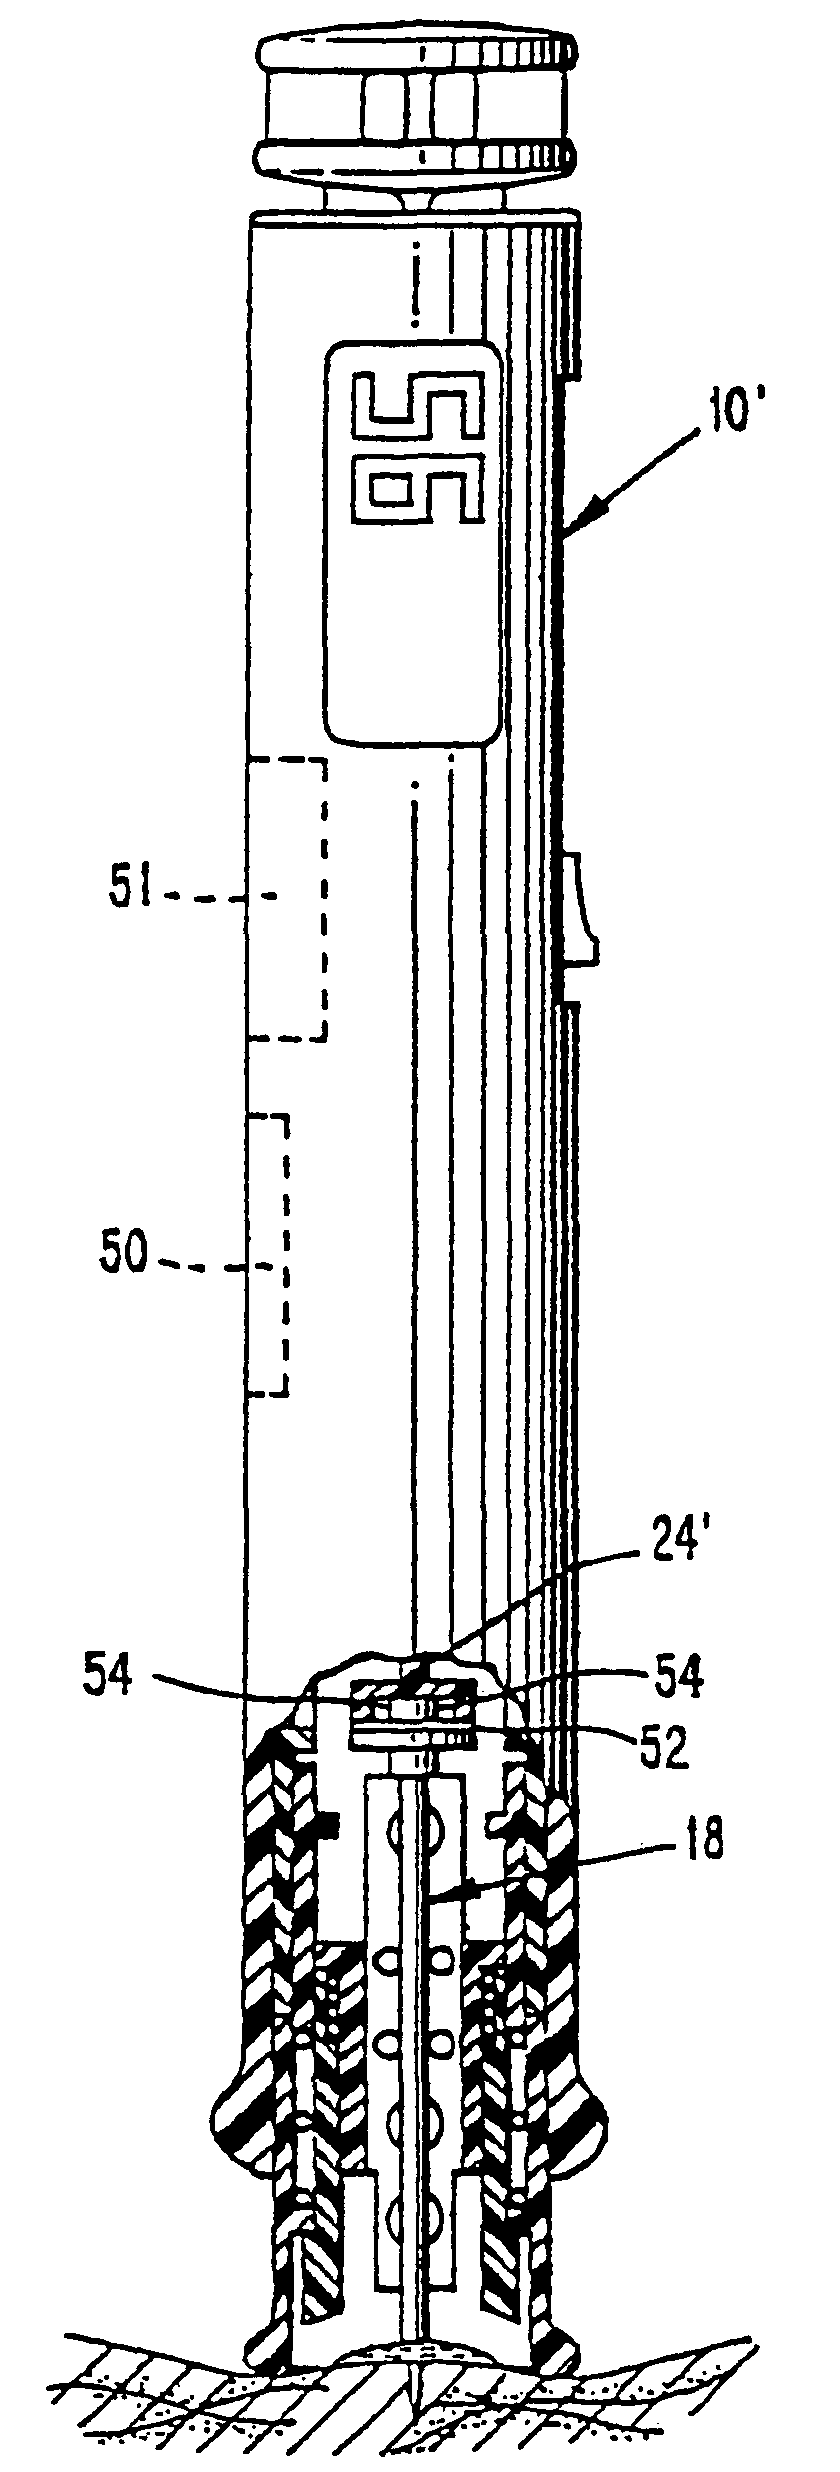 Methods and apparatus for sampling and analyzing body fluid